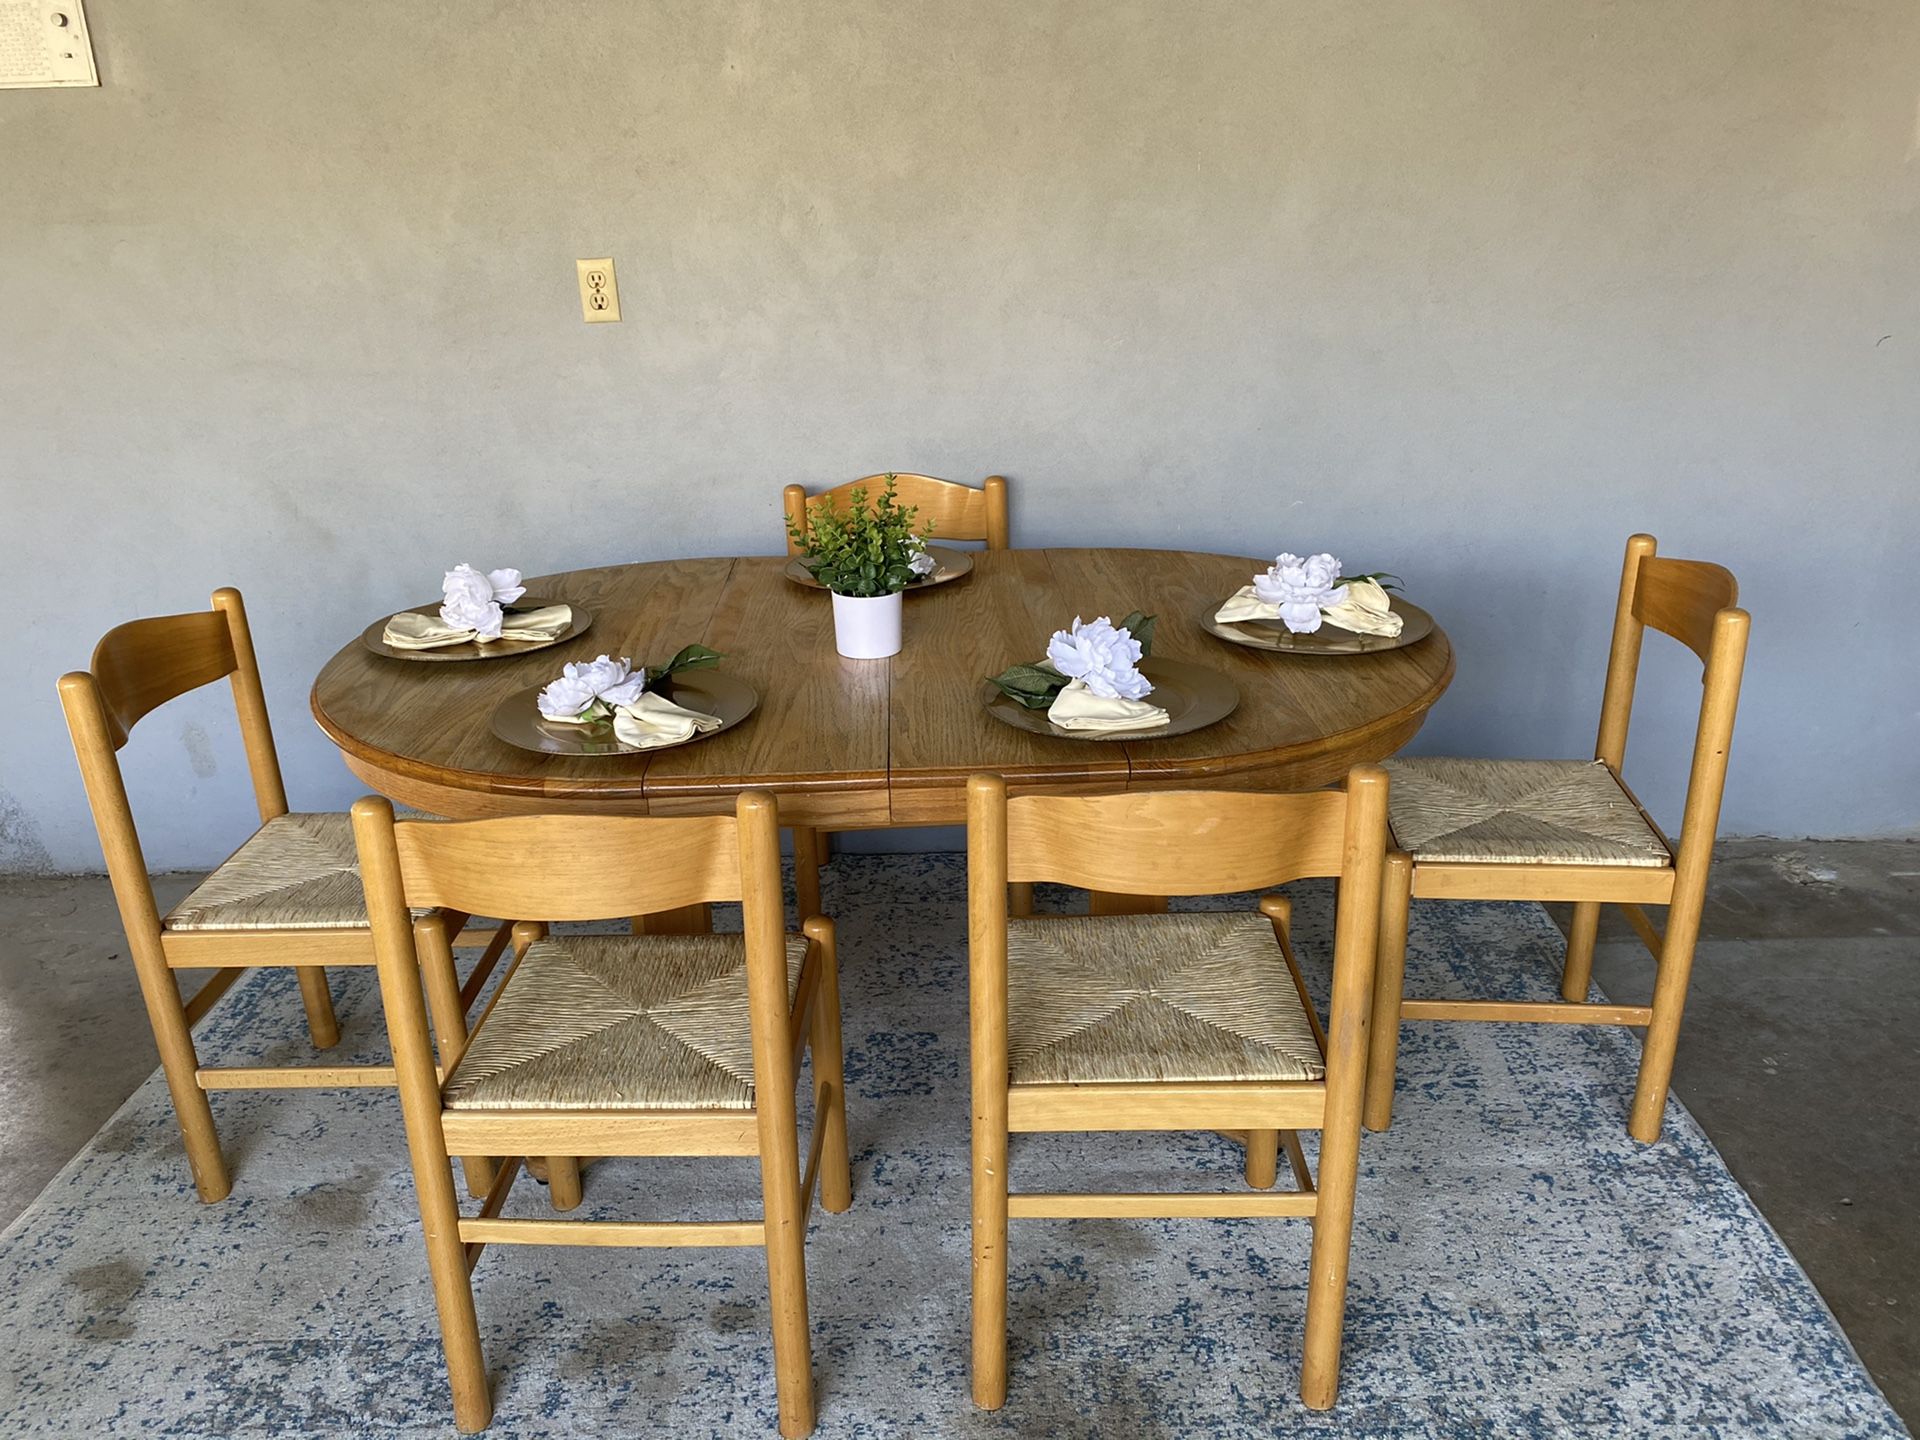 Super cute dining table with 5 chairs in good condition!